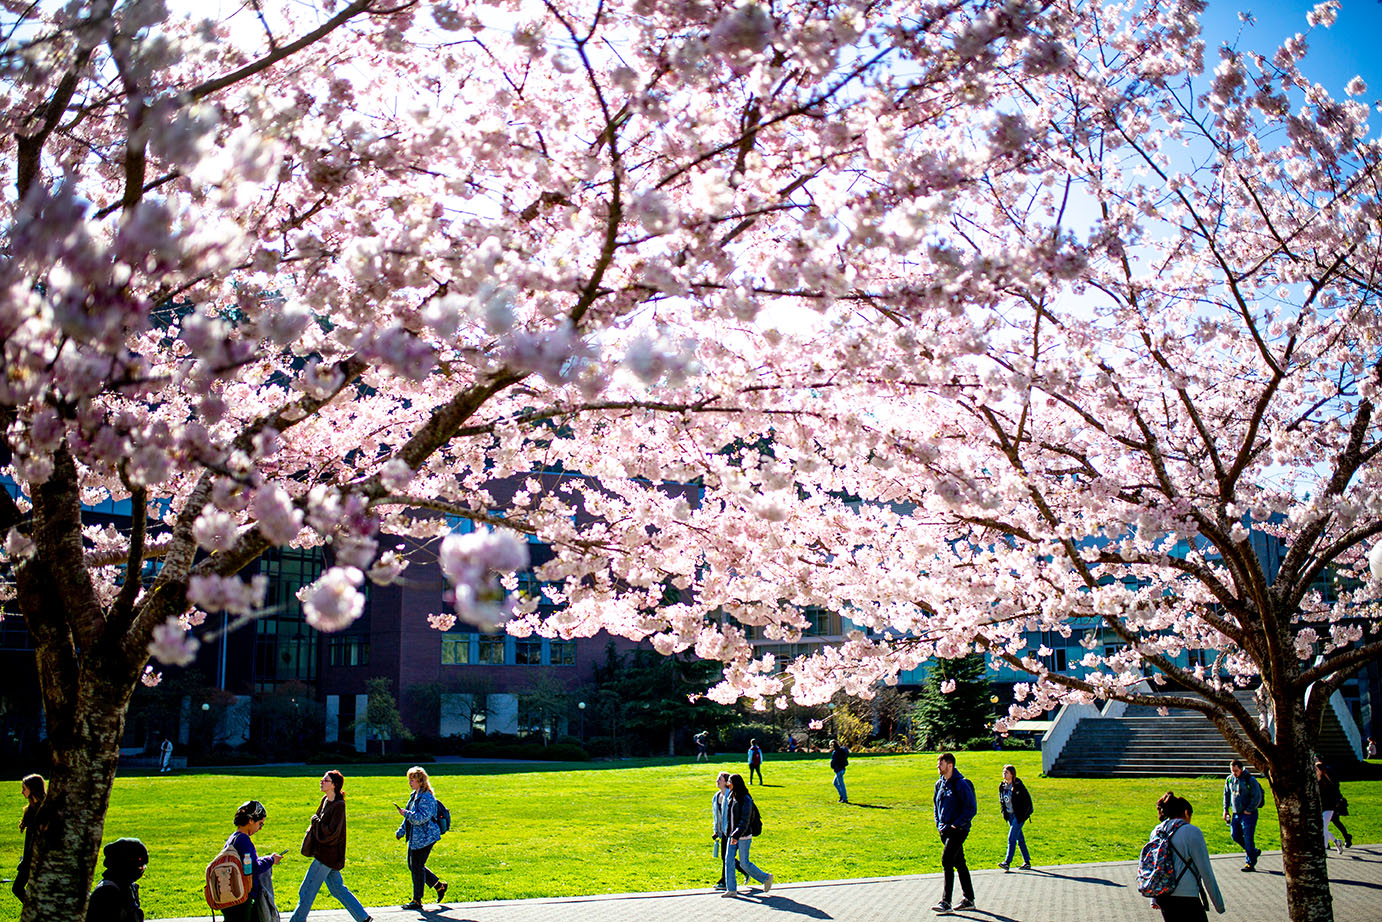 light filters through pink cherry blossoms next to the Comm Lawn